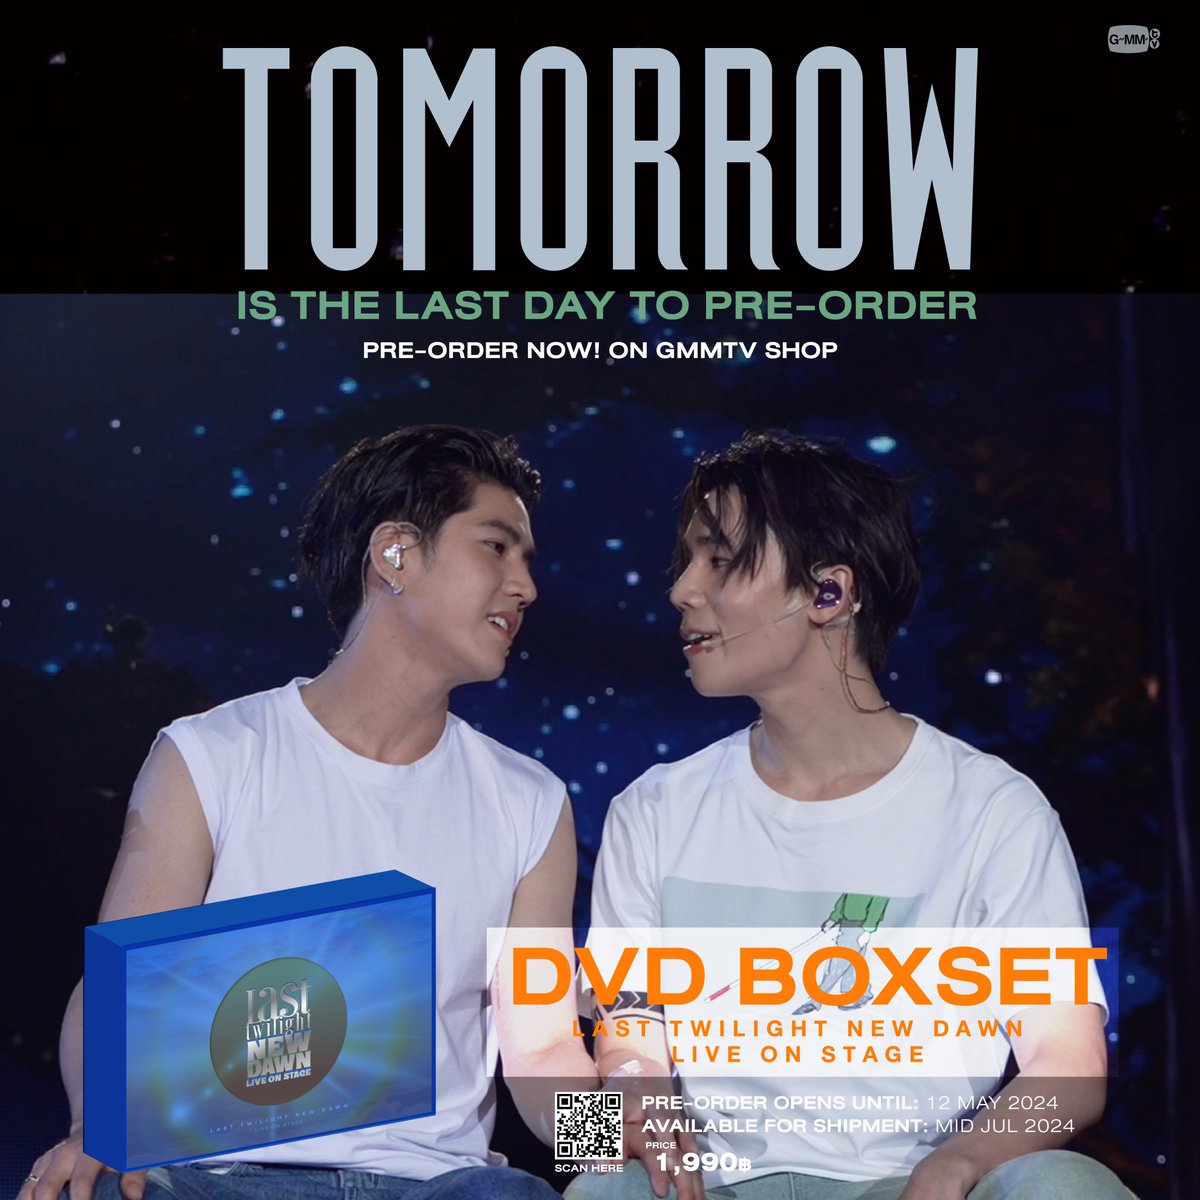 Tomorrow is your last chance to pre-order DVD BOXSET LAST TWILIGHT NEW DAWN LIVE ON STAGE! Head over there and do it now. DVD BOXSET LAST TWILIGHT NEW DAWN LIVE ON STAGE gmm-tv.com/shop/dvd-boxse… #LastTwilightOnStage #GMMTV